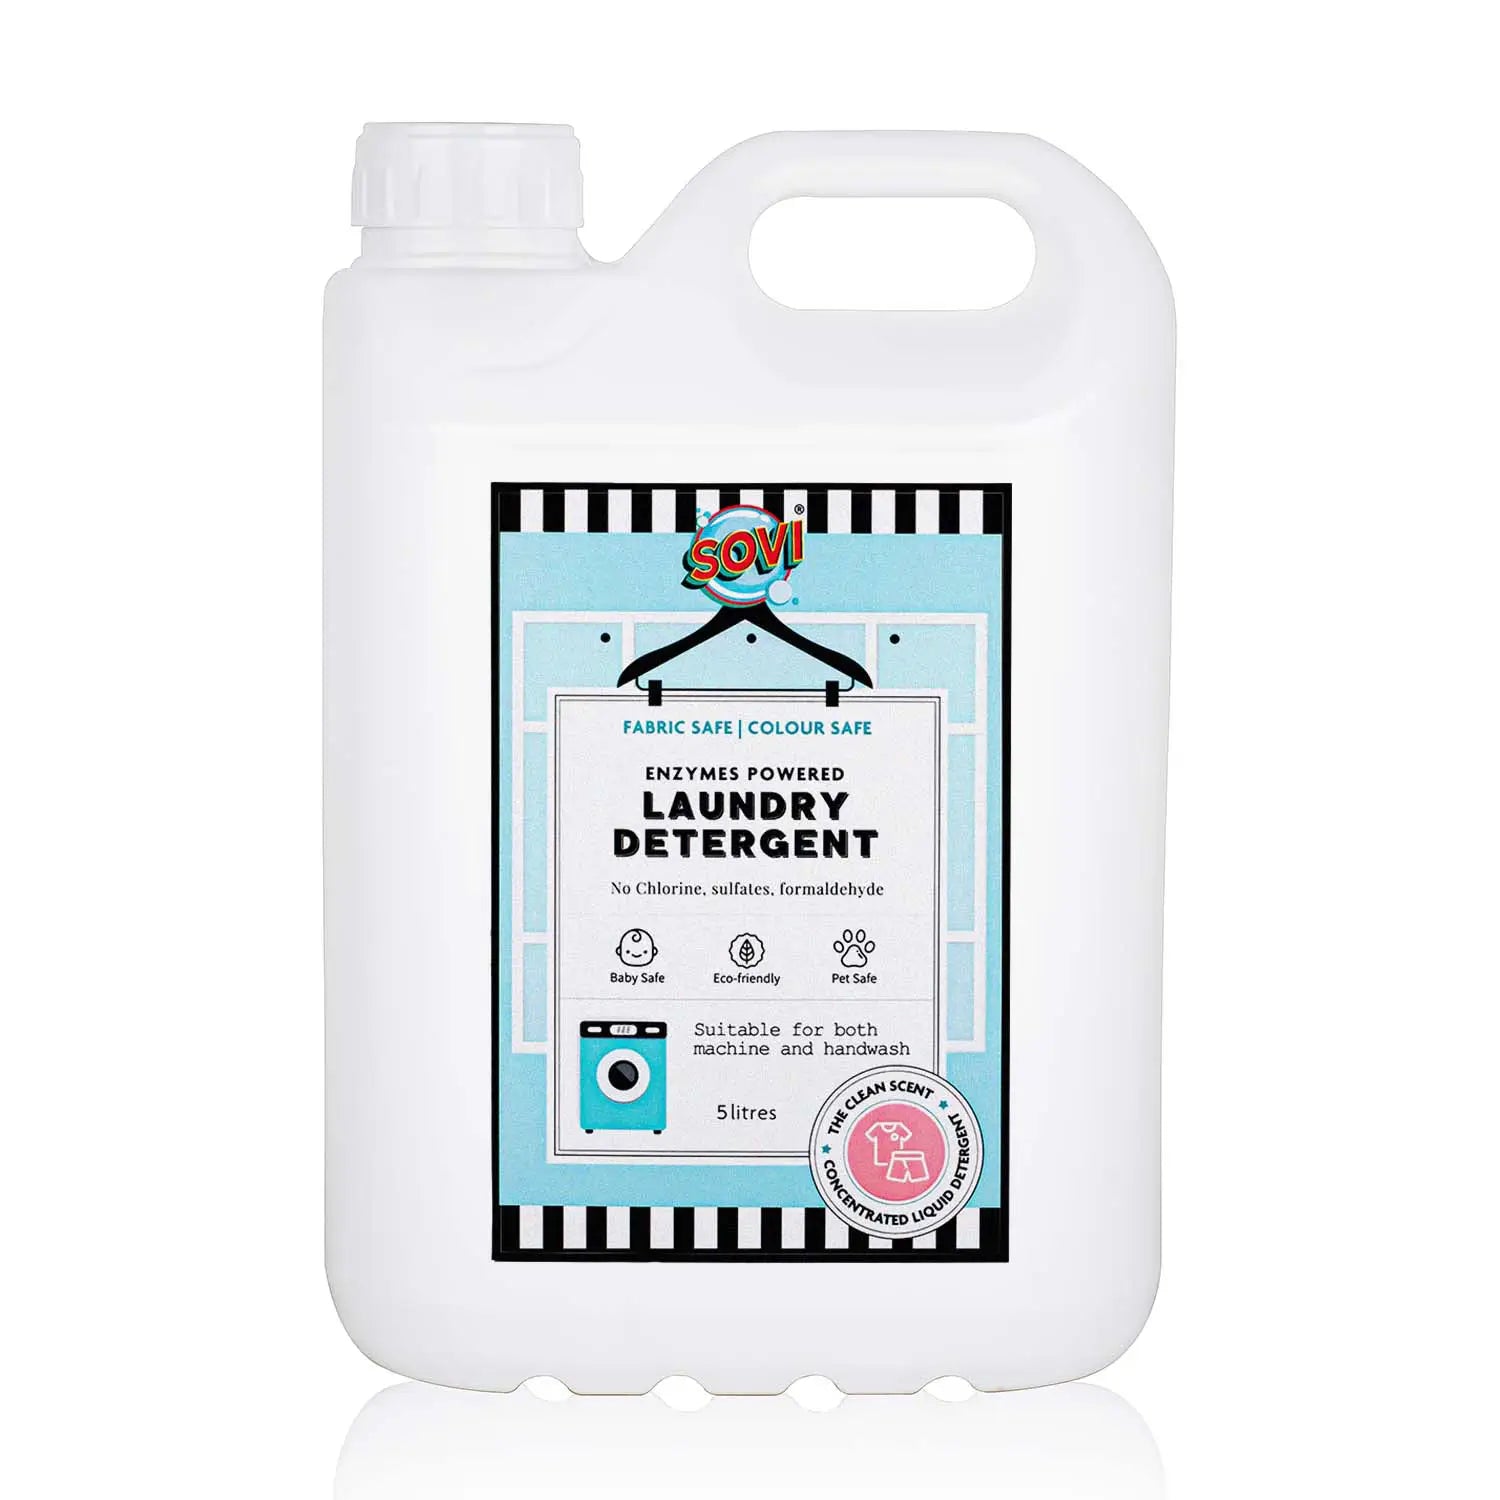 SOVI® ENZYMES POWERED LIQUID LAUNDRY DETERGENT, COLOUR SAFE, FABRIC SAFE, BABY SAFE, PET SAFE, CONVENTRATED LIQUID ( 5L )